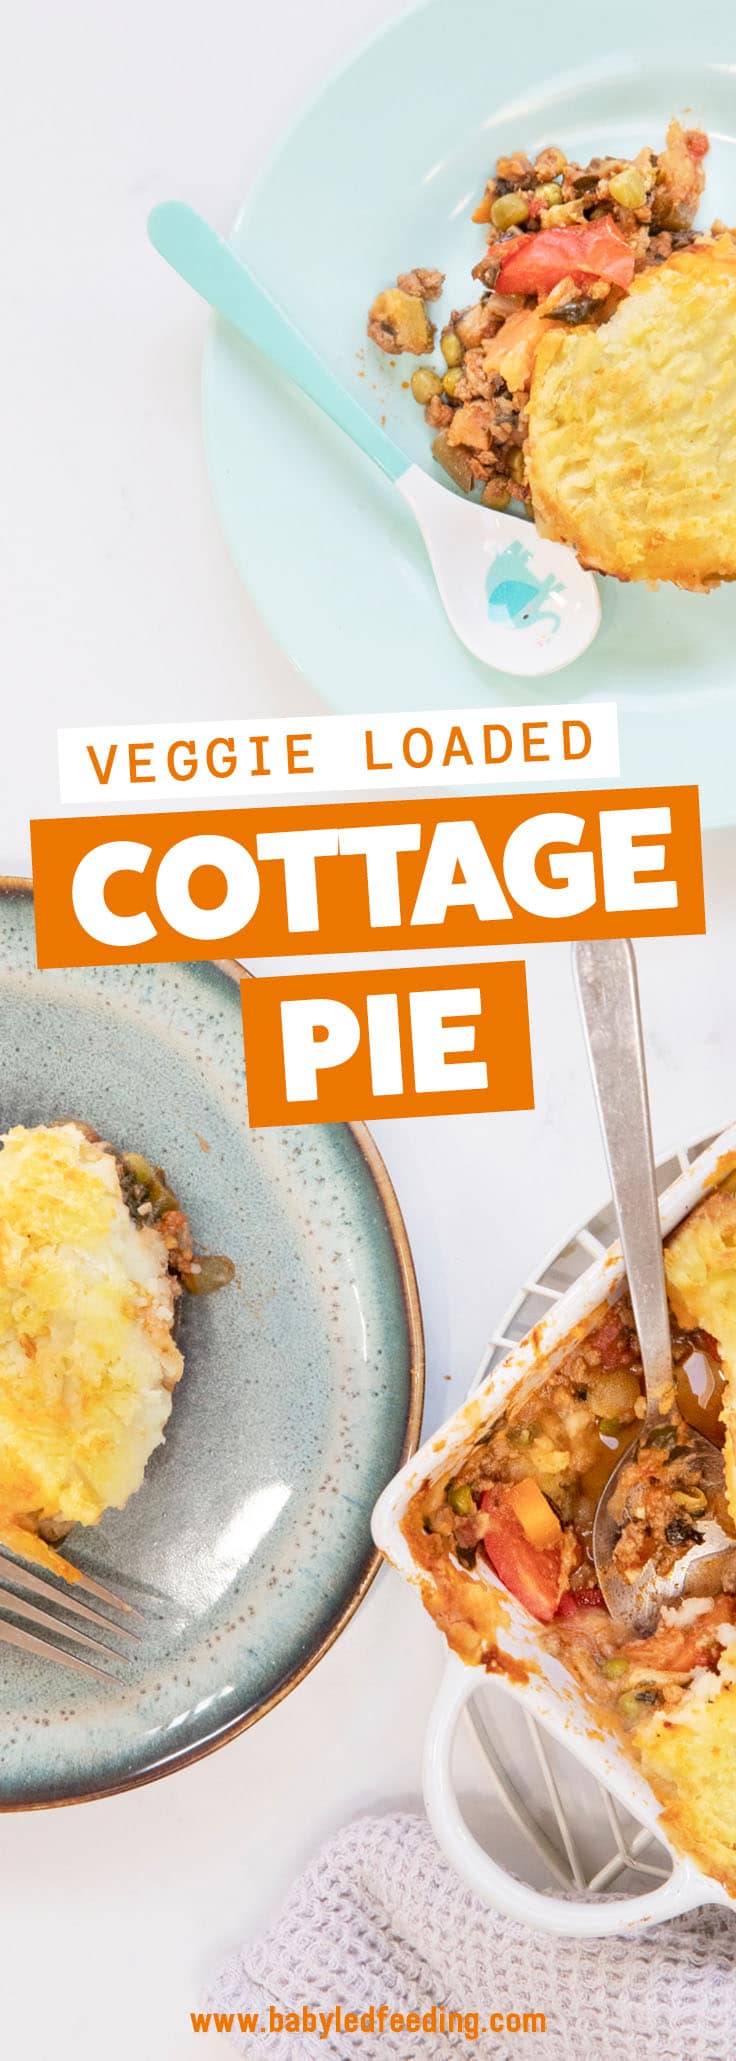 Veggie Loaded Cottage Pie for baby led weaning Pinterest